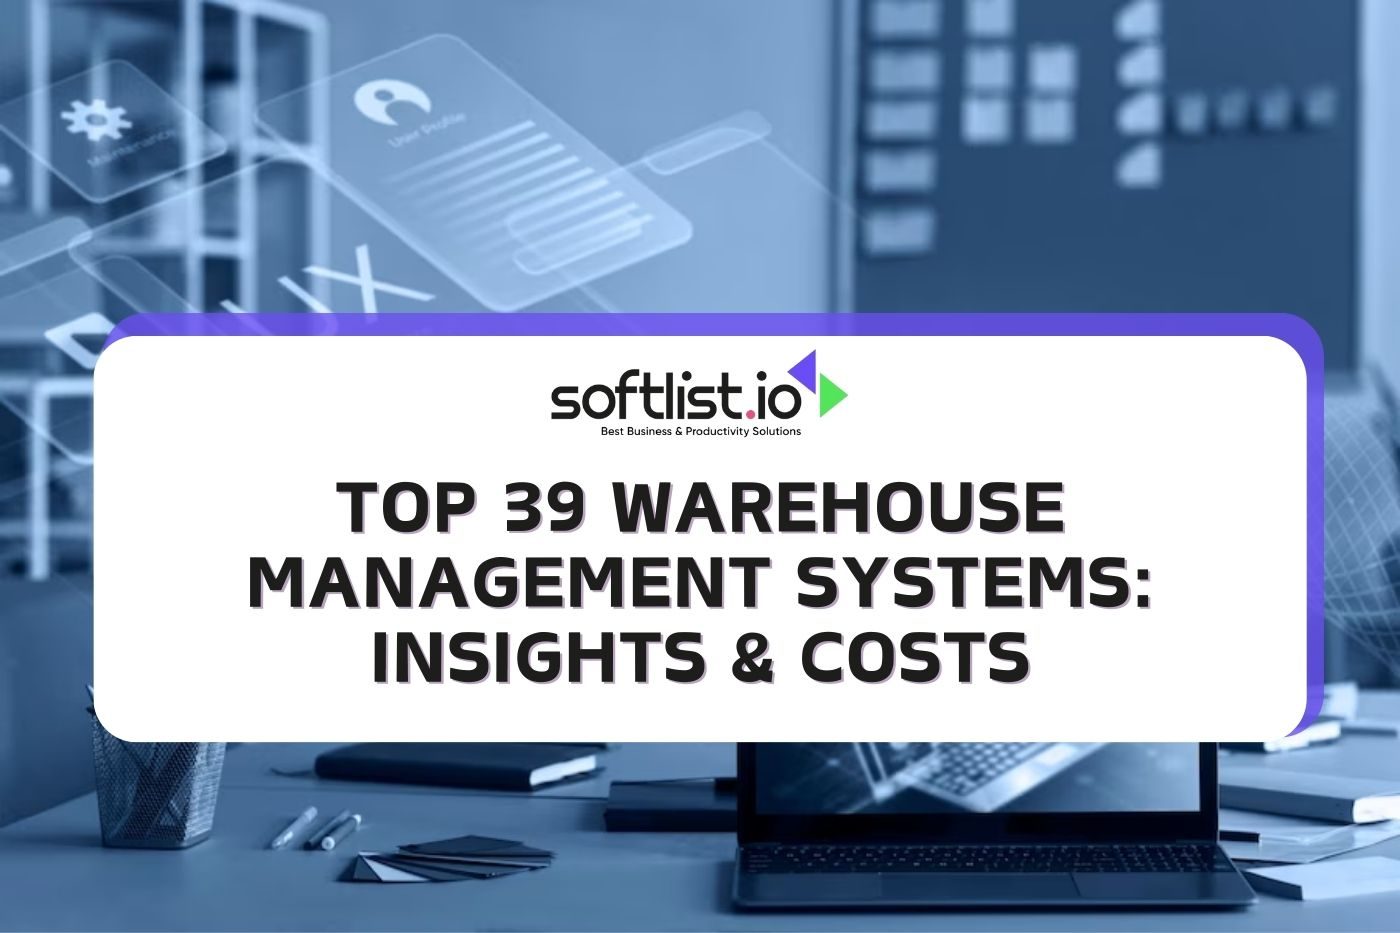 Top 39 Warehouse Management Systems: Insights & Costs